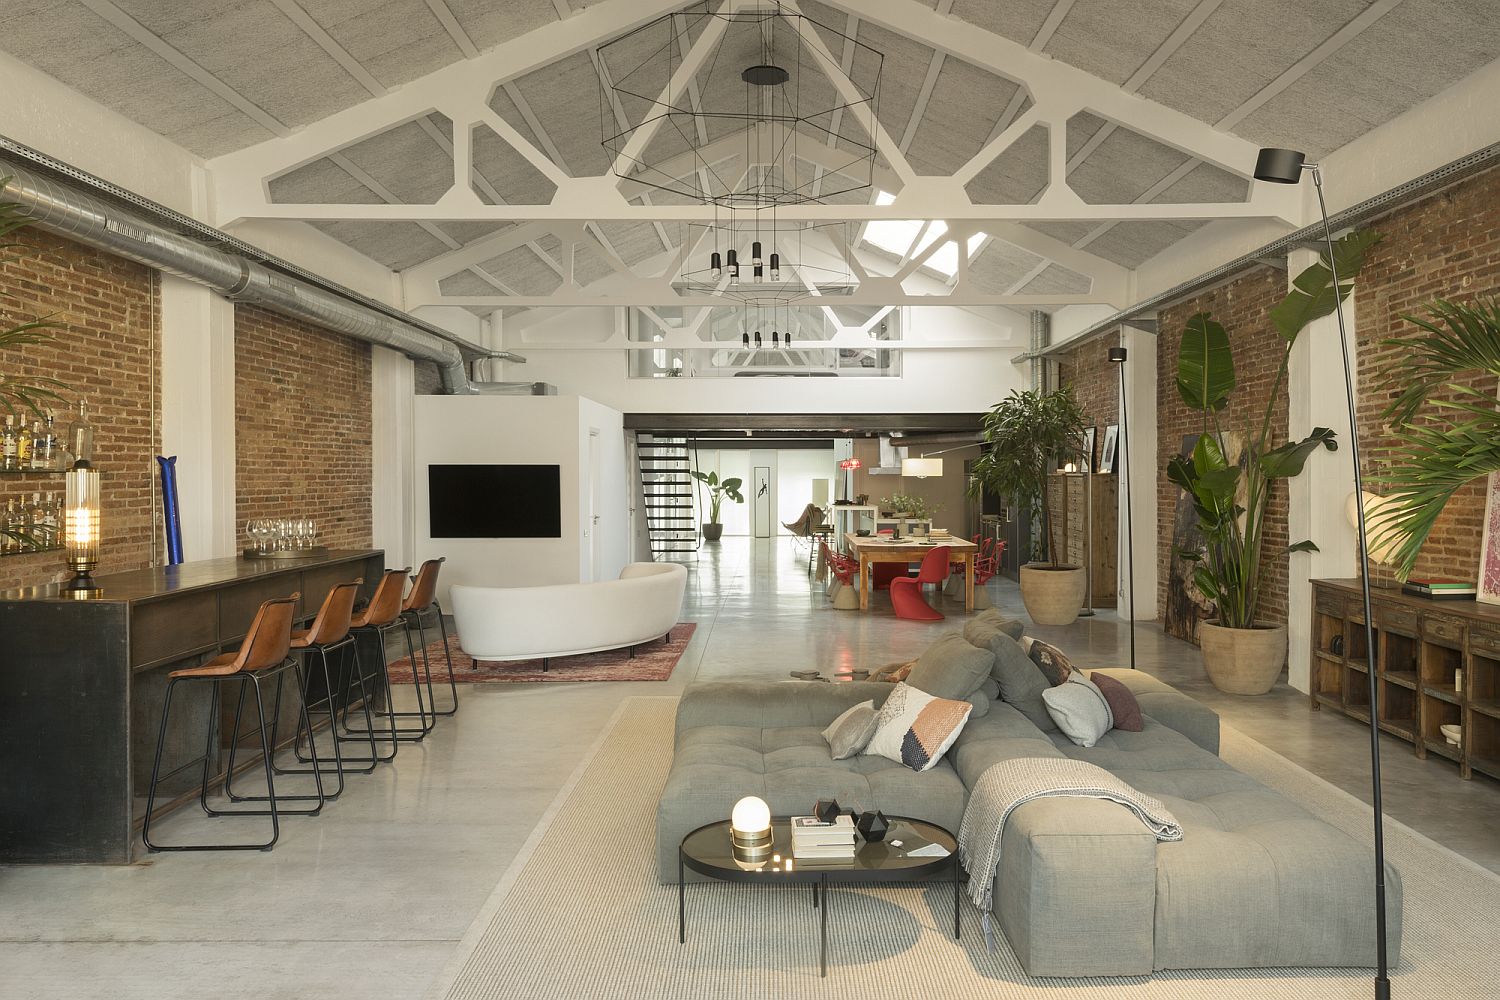 Delightful vaulted ceiling in white adds contemporary appeal to the industrial loft